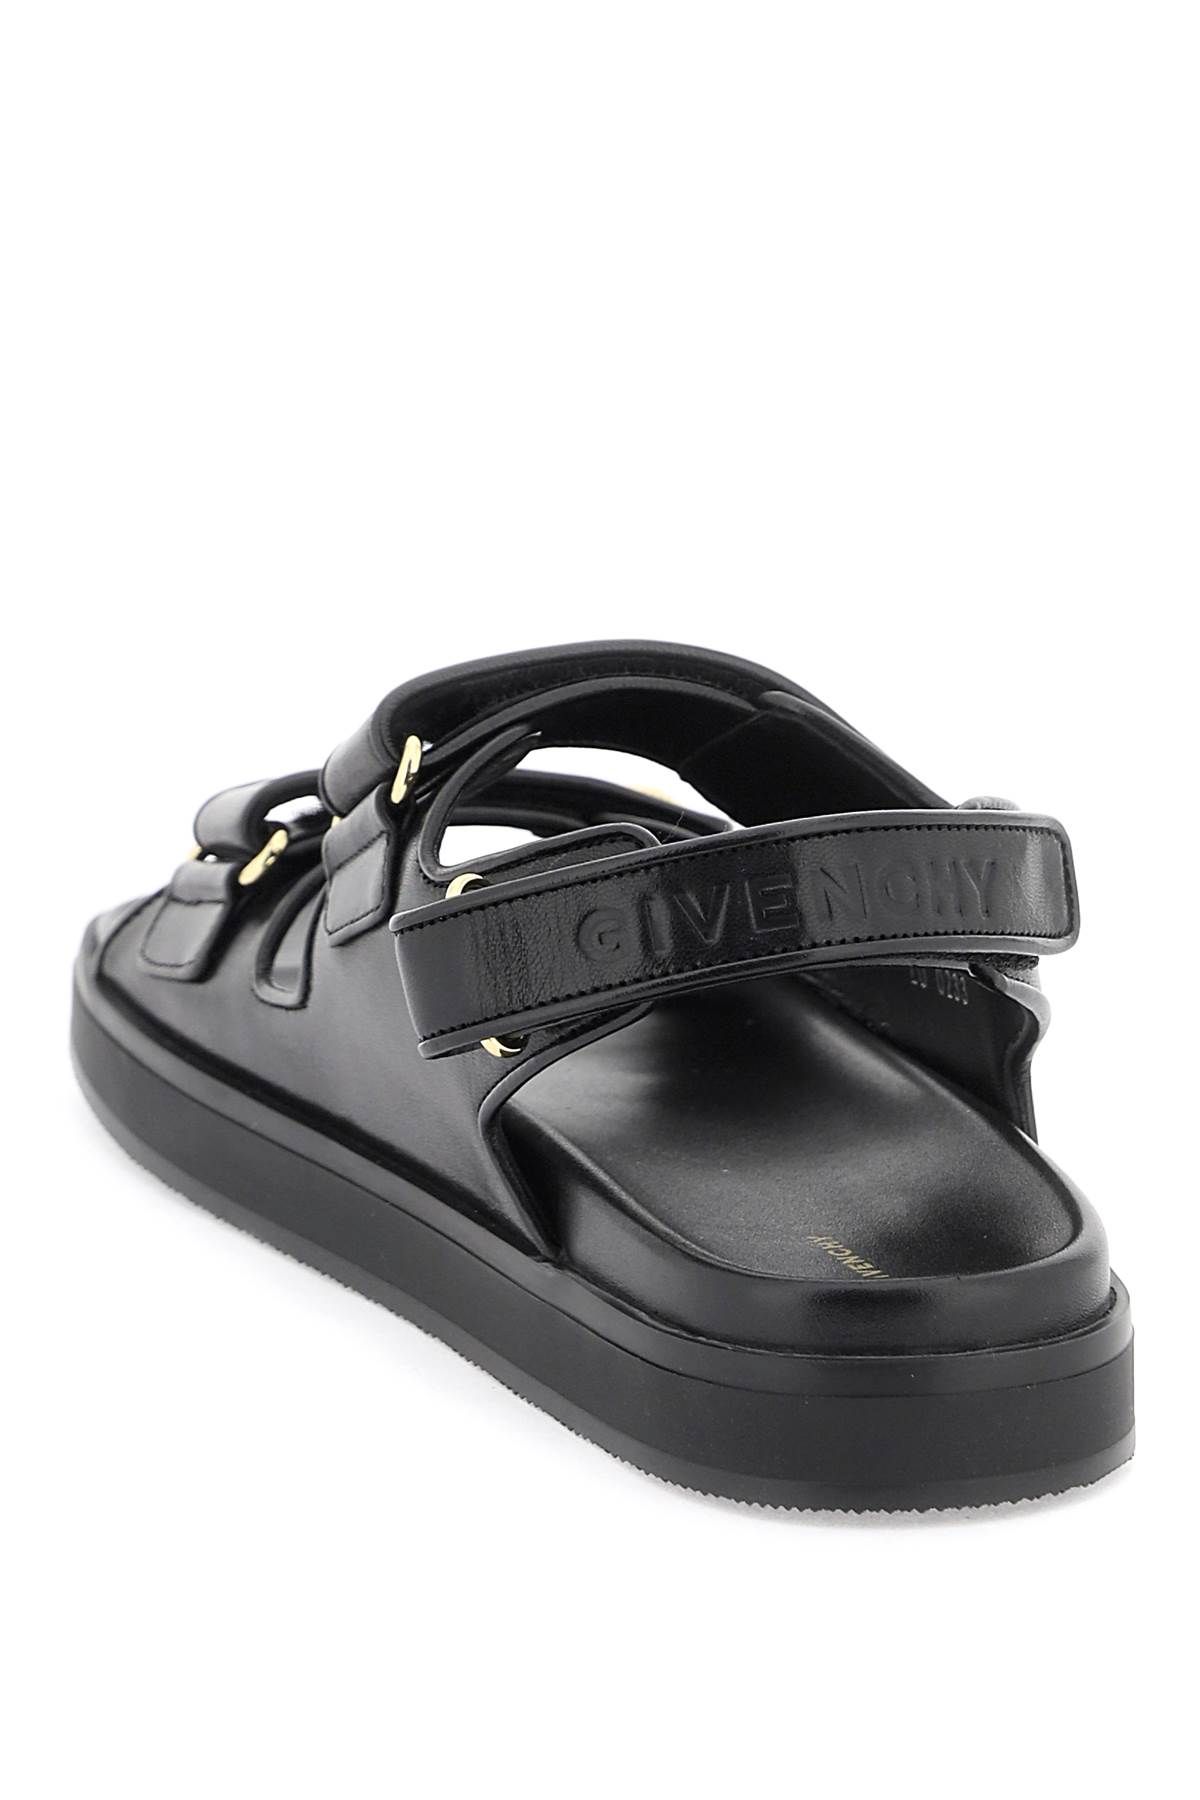 Shop Givenchy Leather 4g Sandals In Black